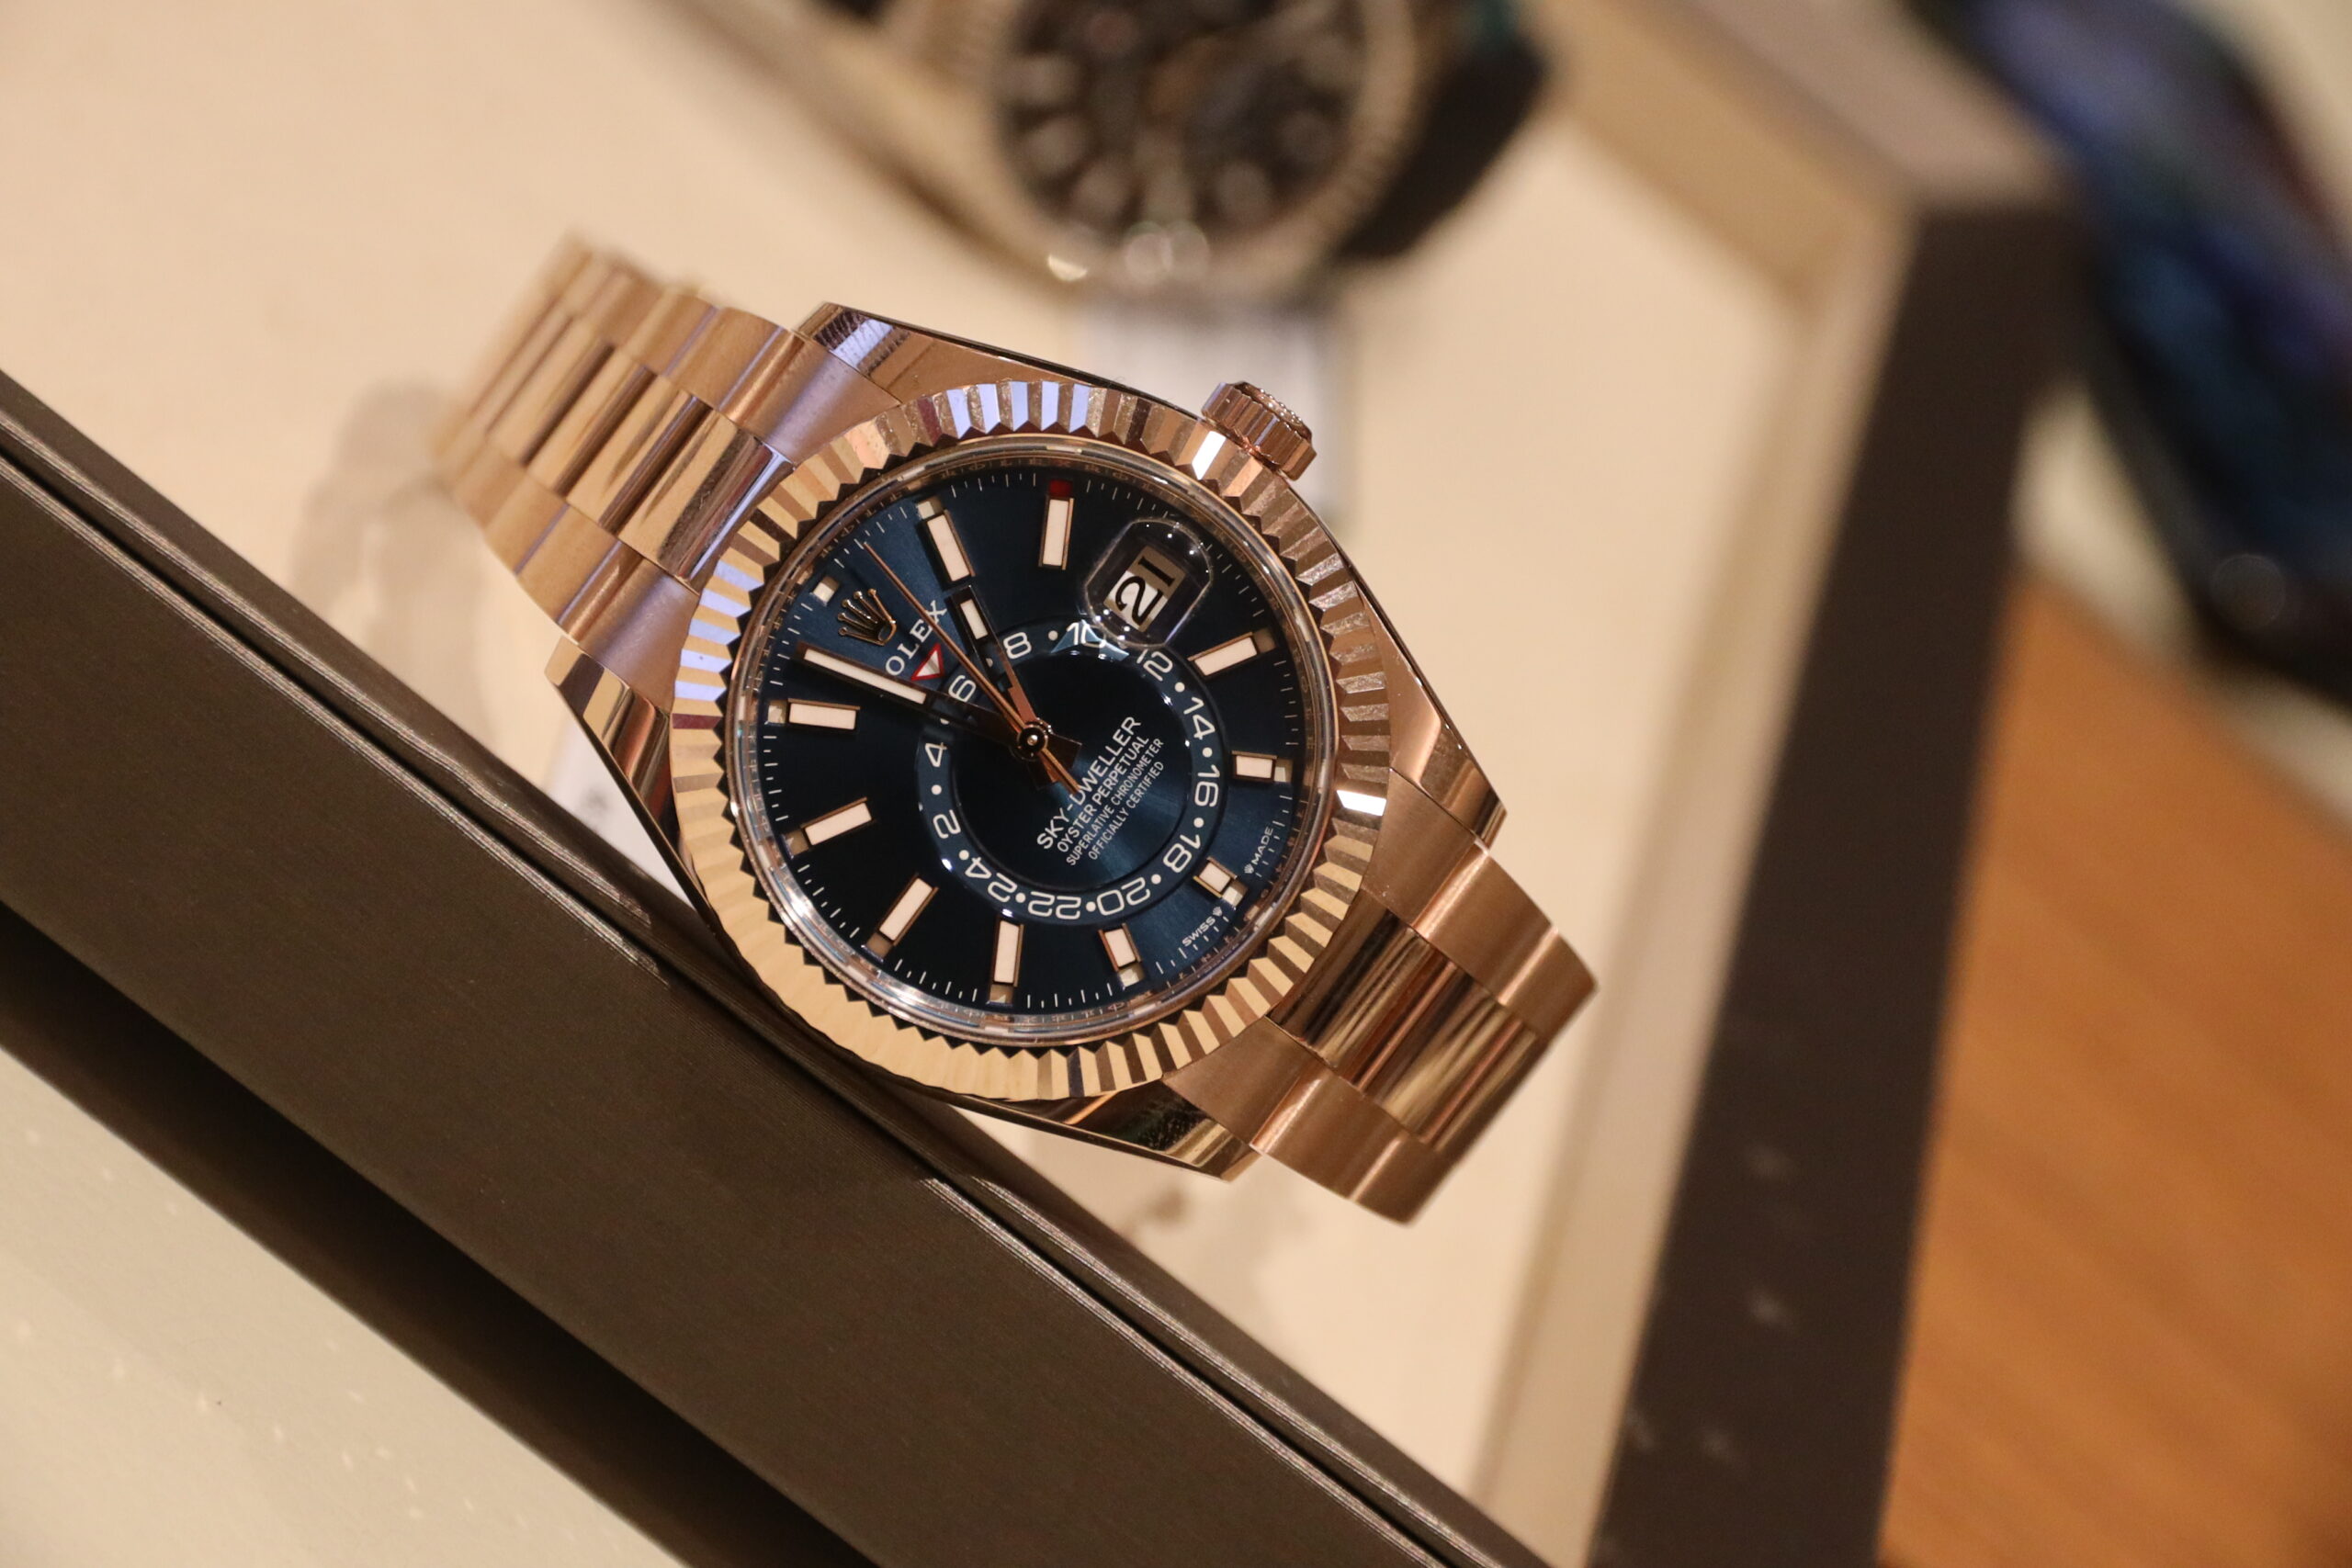 Introducing The New Rolex Sky-Dweller Watches (Live Pics) – WristReview.com  – Featuring Watch Reviews, Critiques, Reports & News